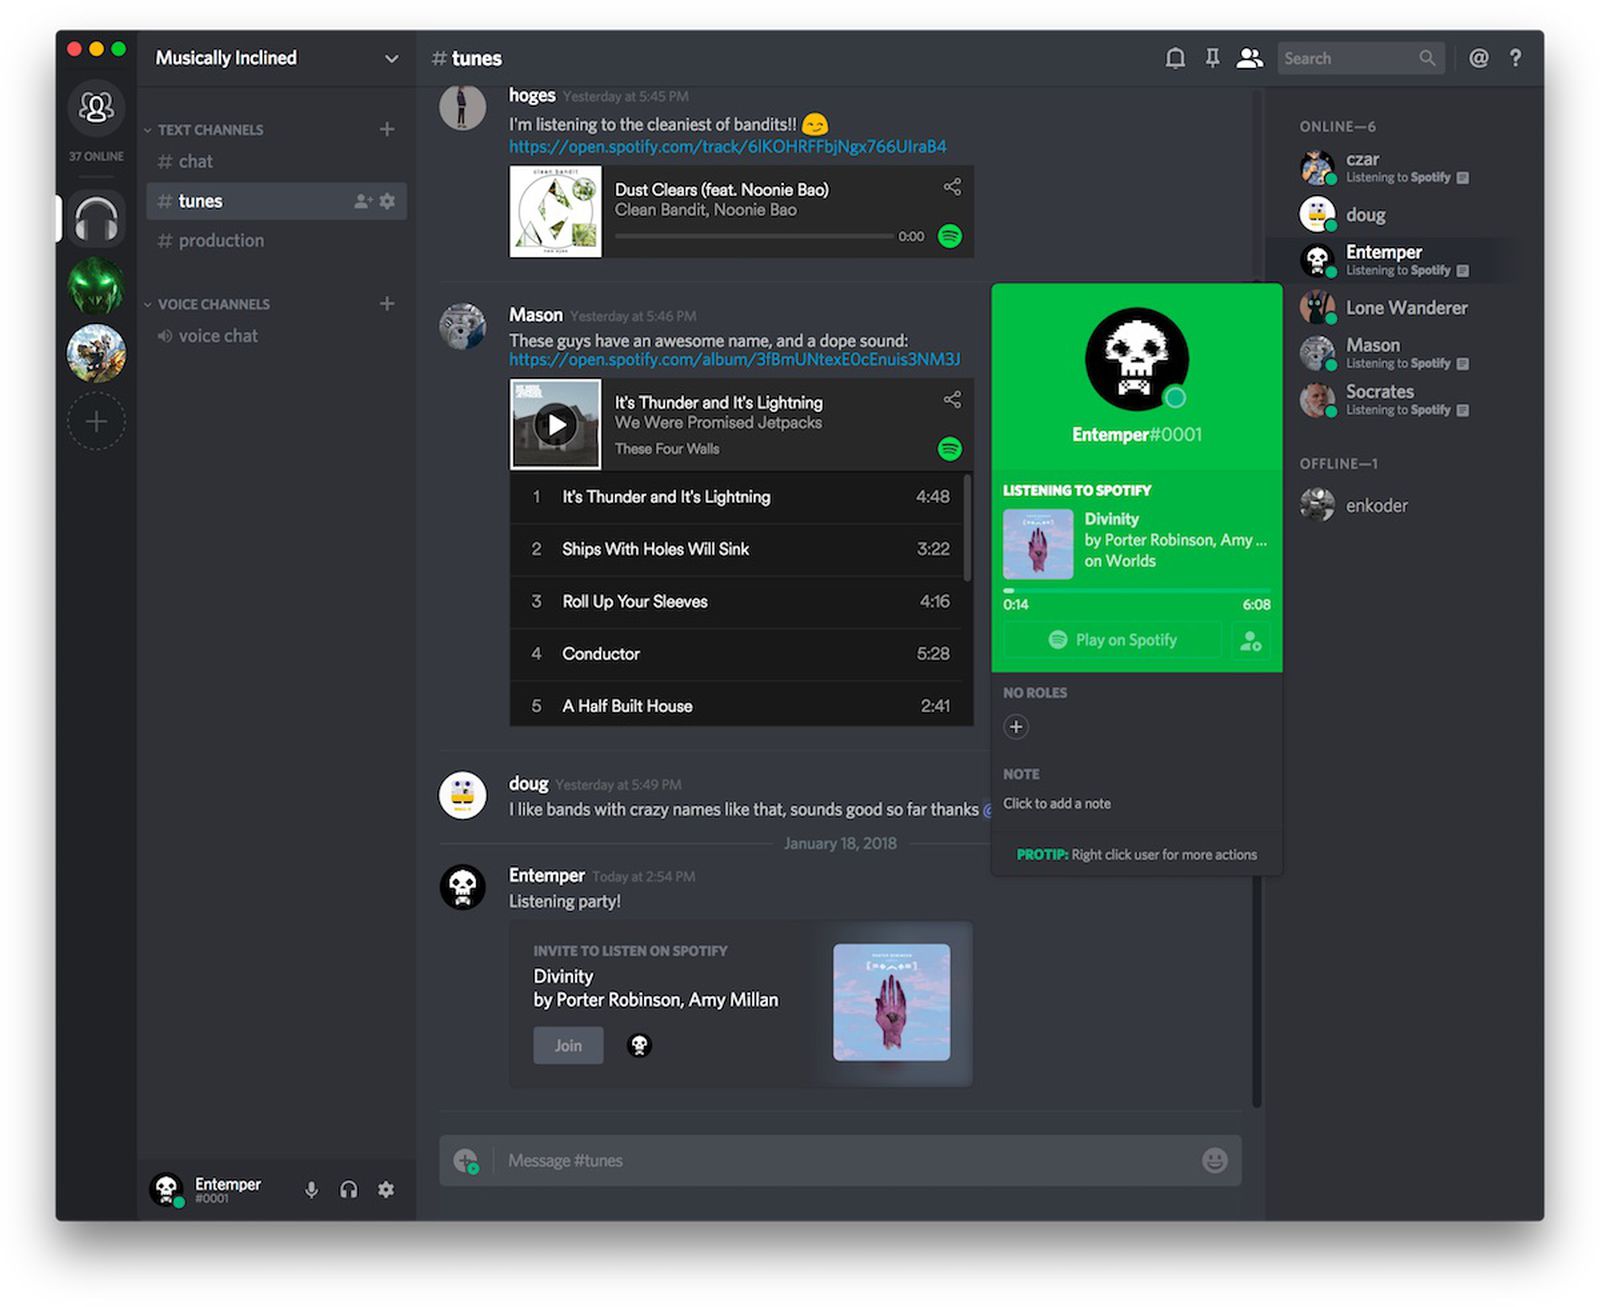 New Integration: Chat for Free While Gaming with Discord - Updates